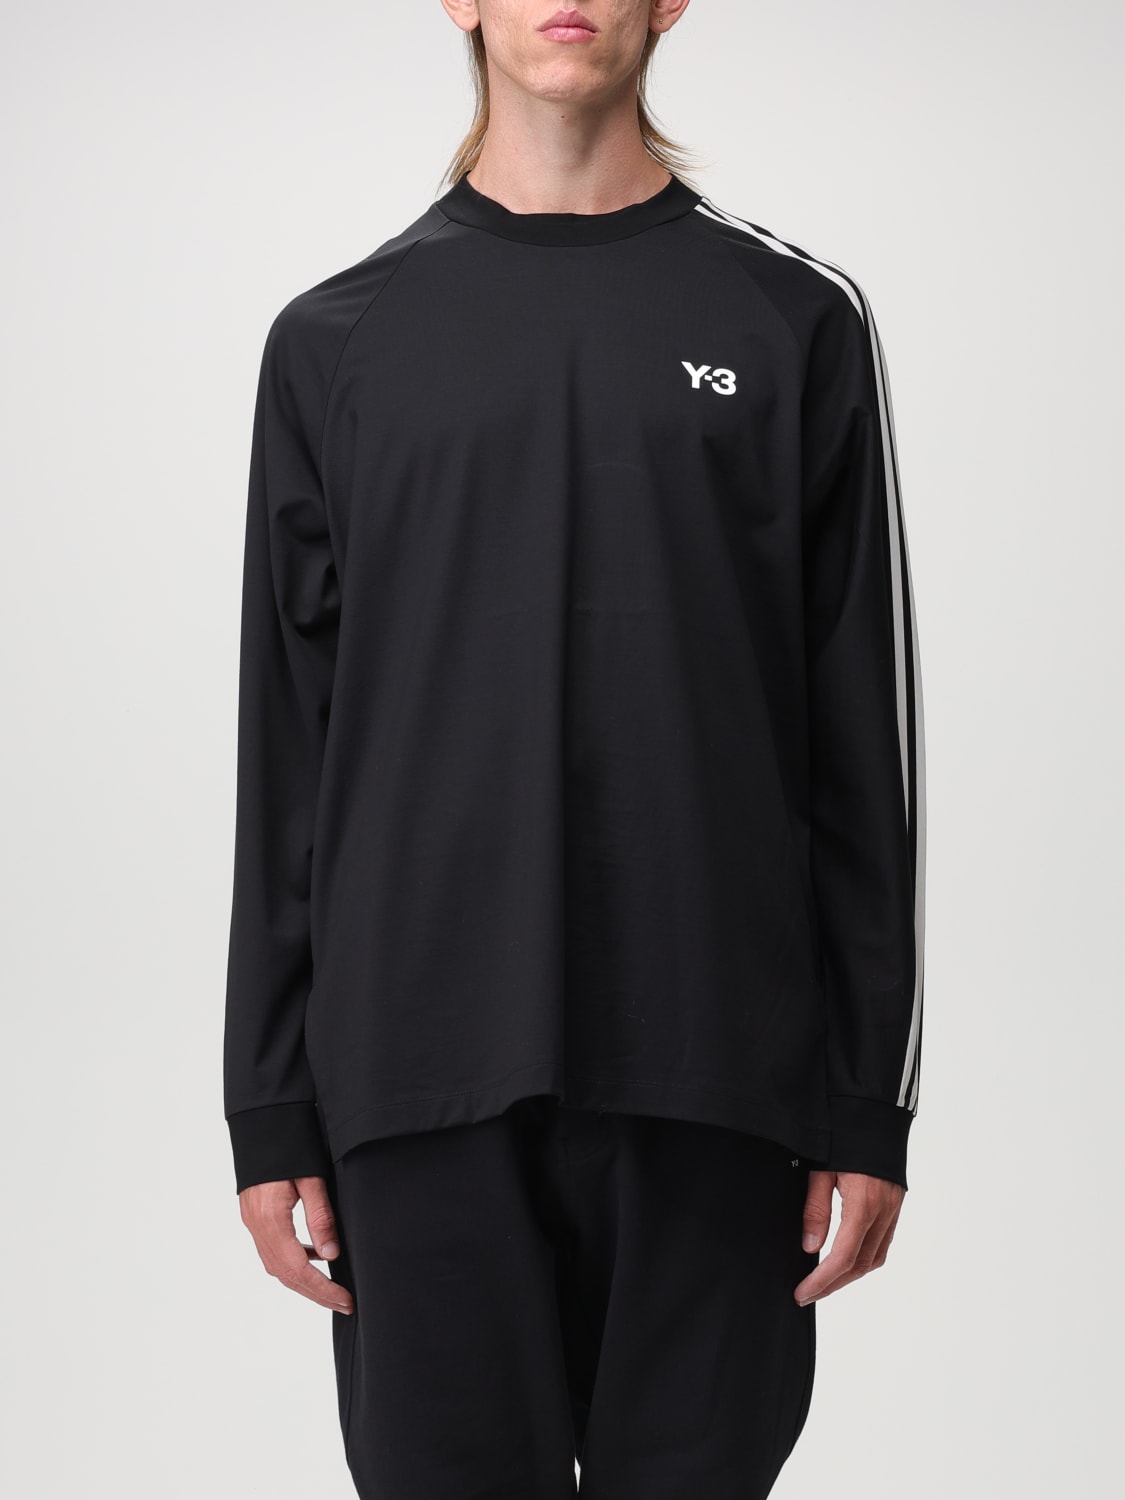 Y-3: t-shirt for man - Black | Y-3 t-shirt H44800 online at GIGLIO.COM